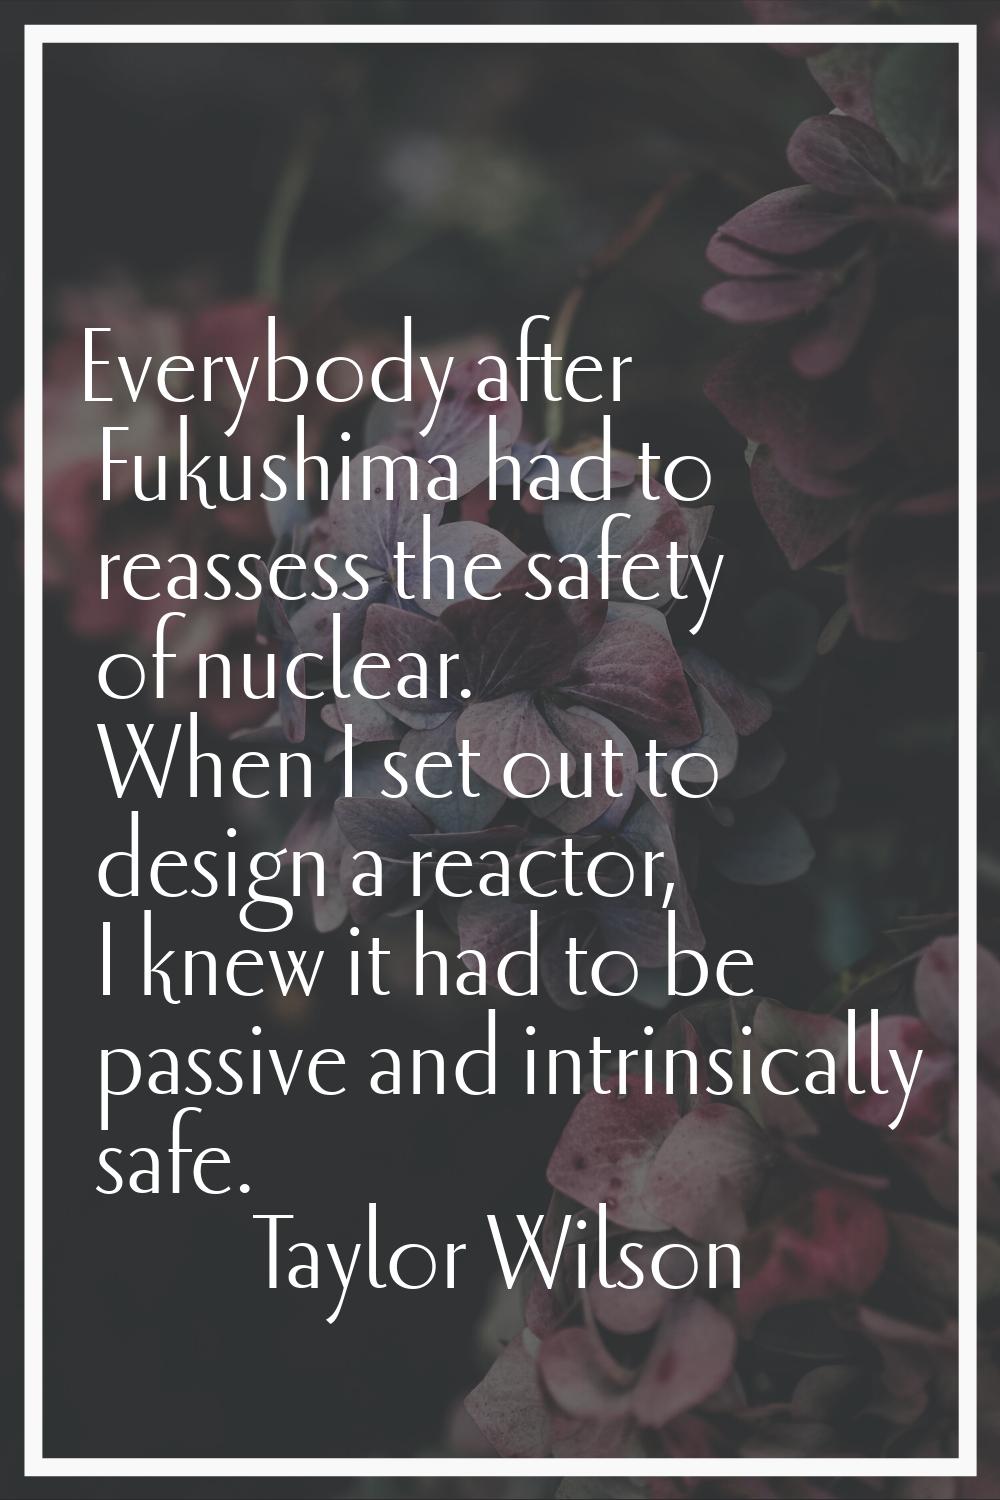 Everybody after Fukushima had to reassess the safety of nuclear. When I set out to design a reactor